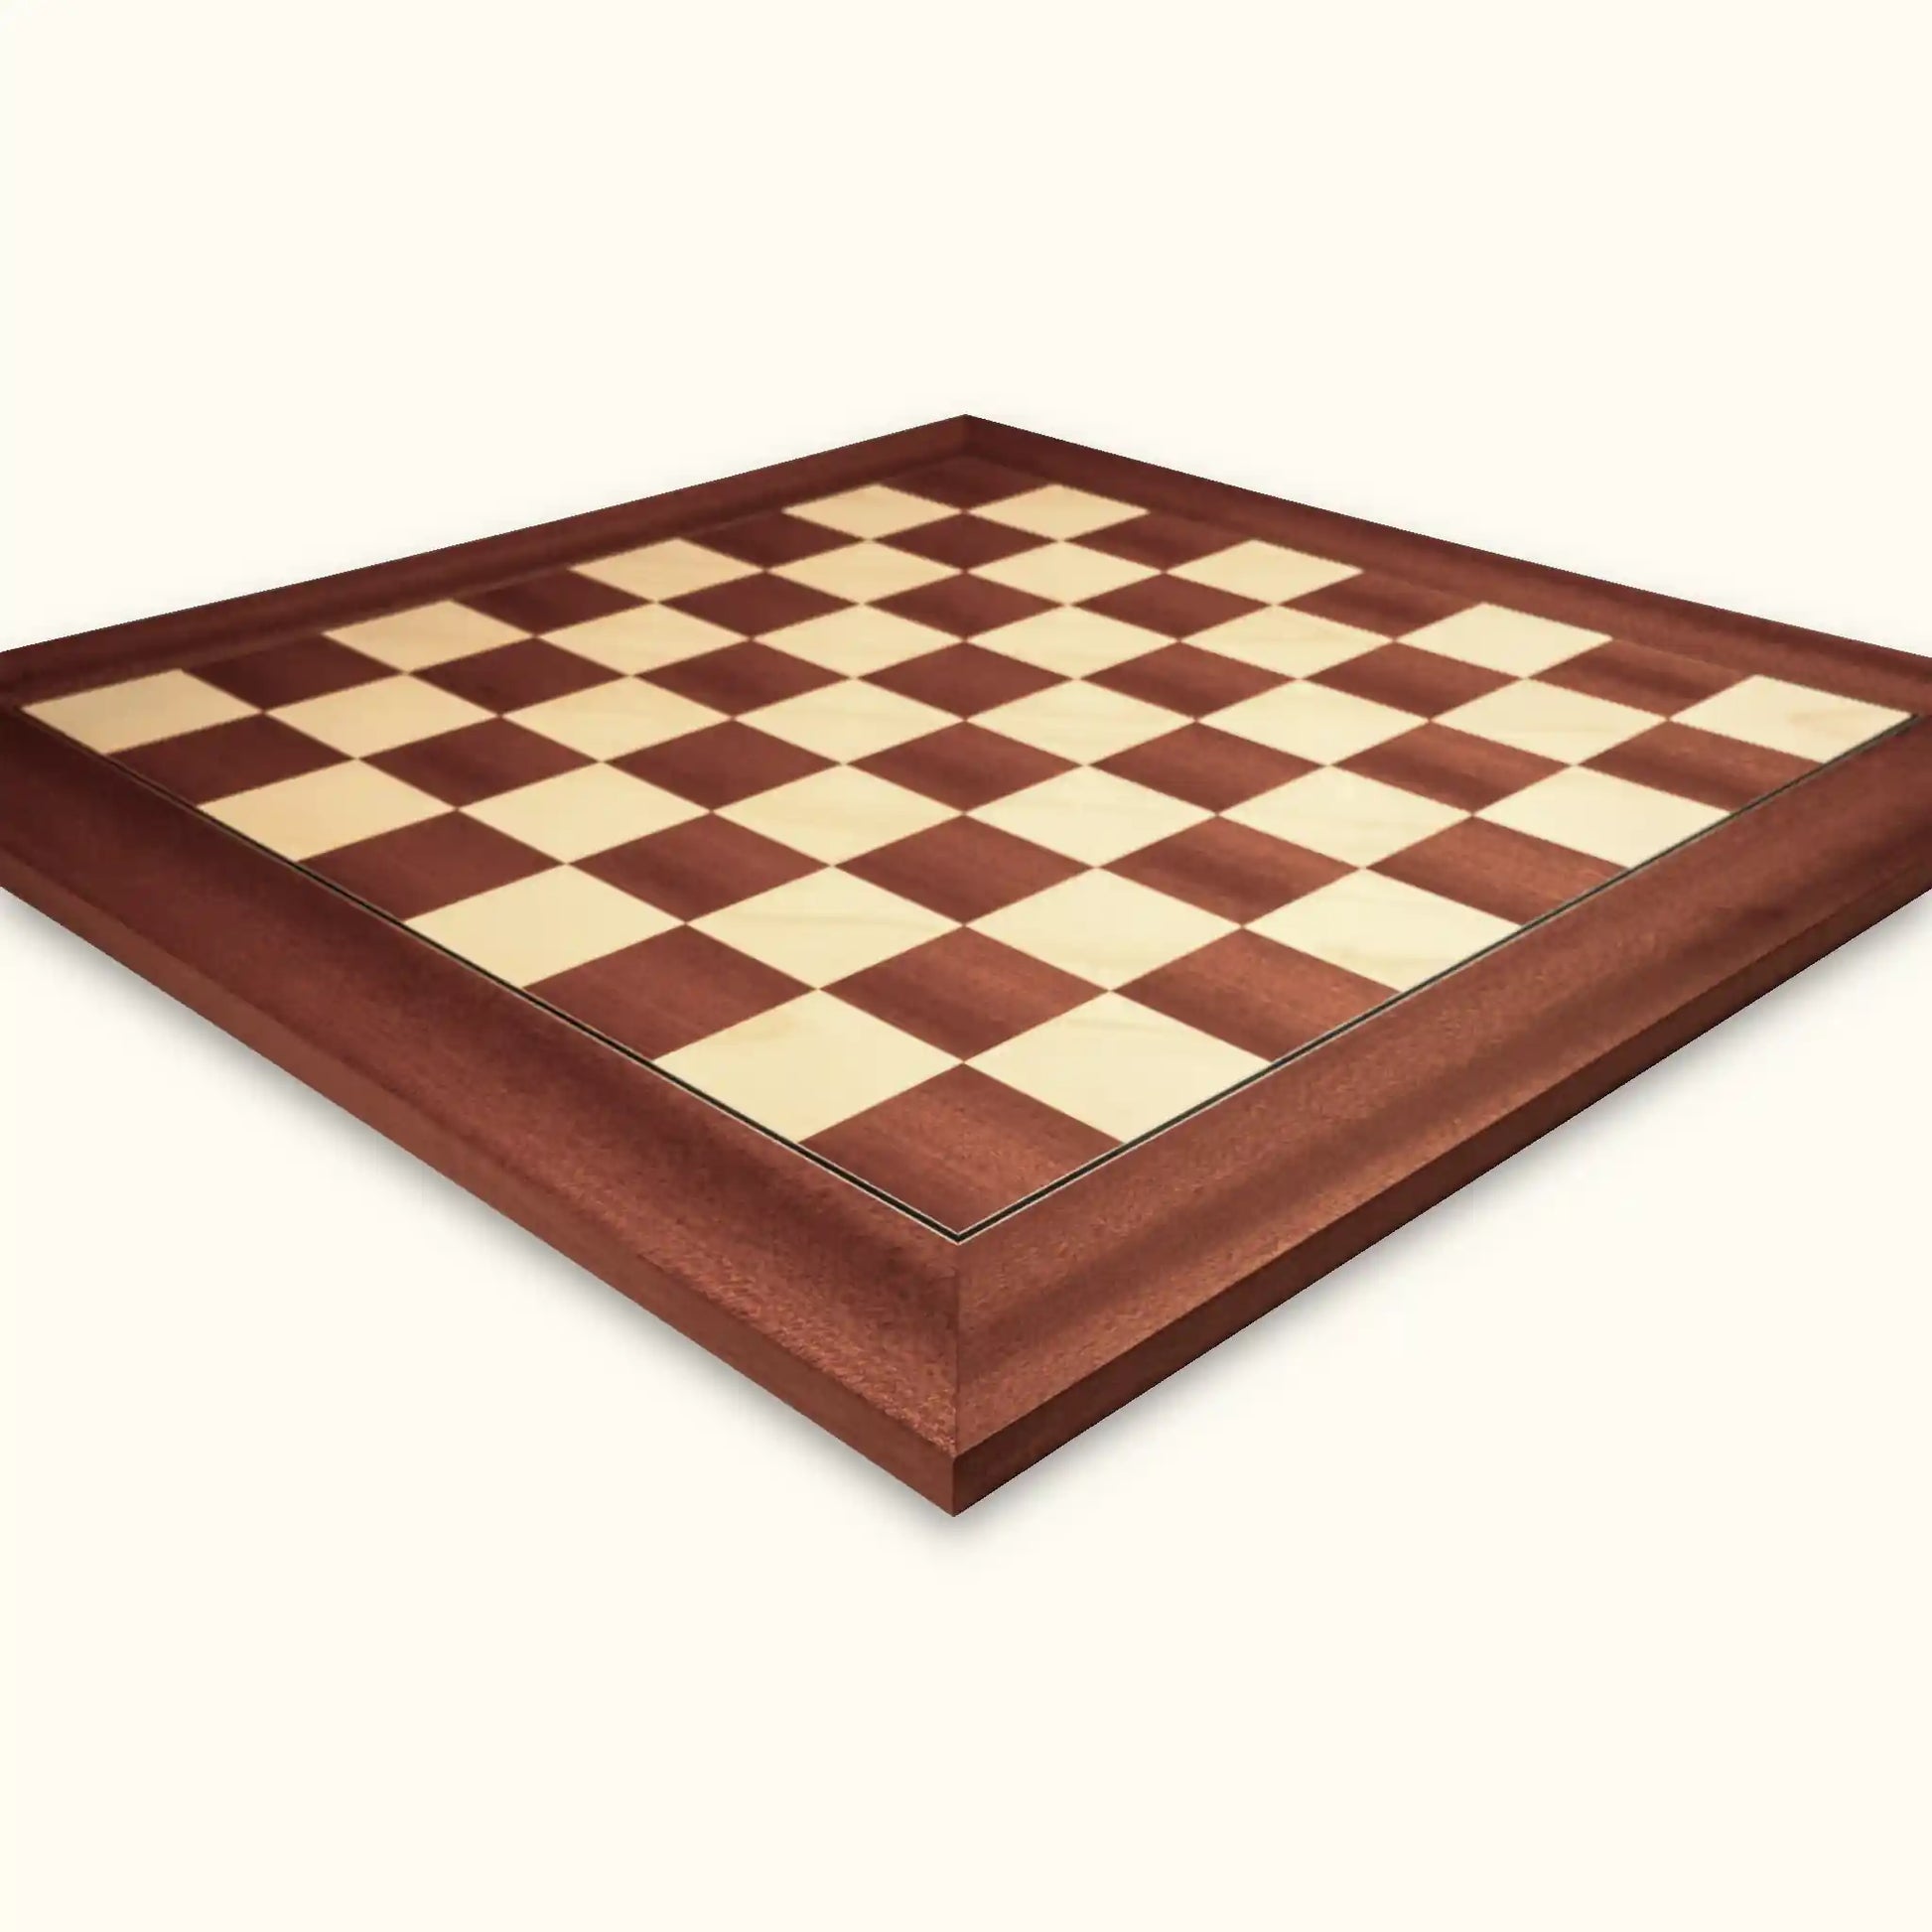 Chessboard mahogany deluxe 55 mm side view